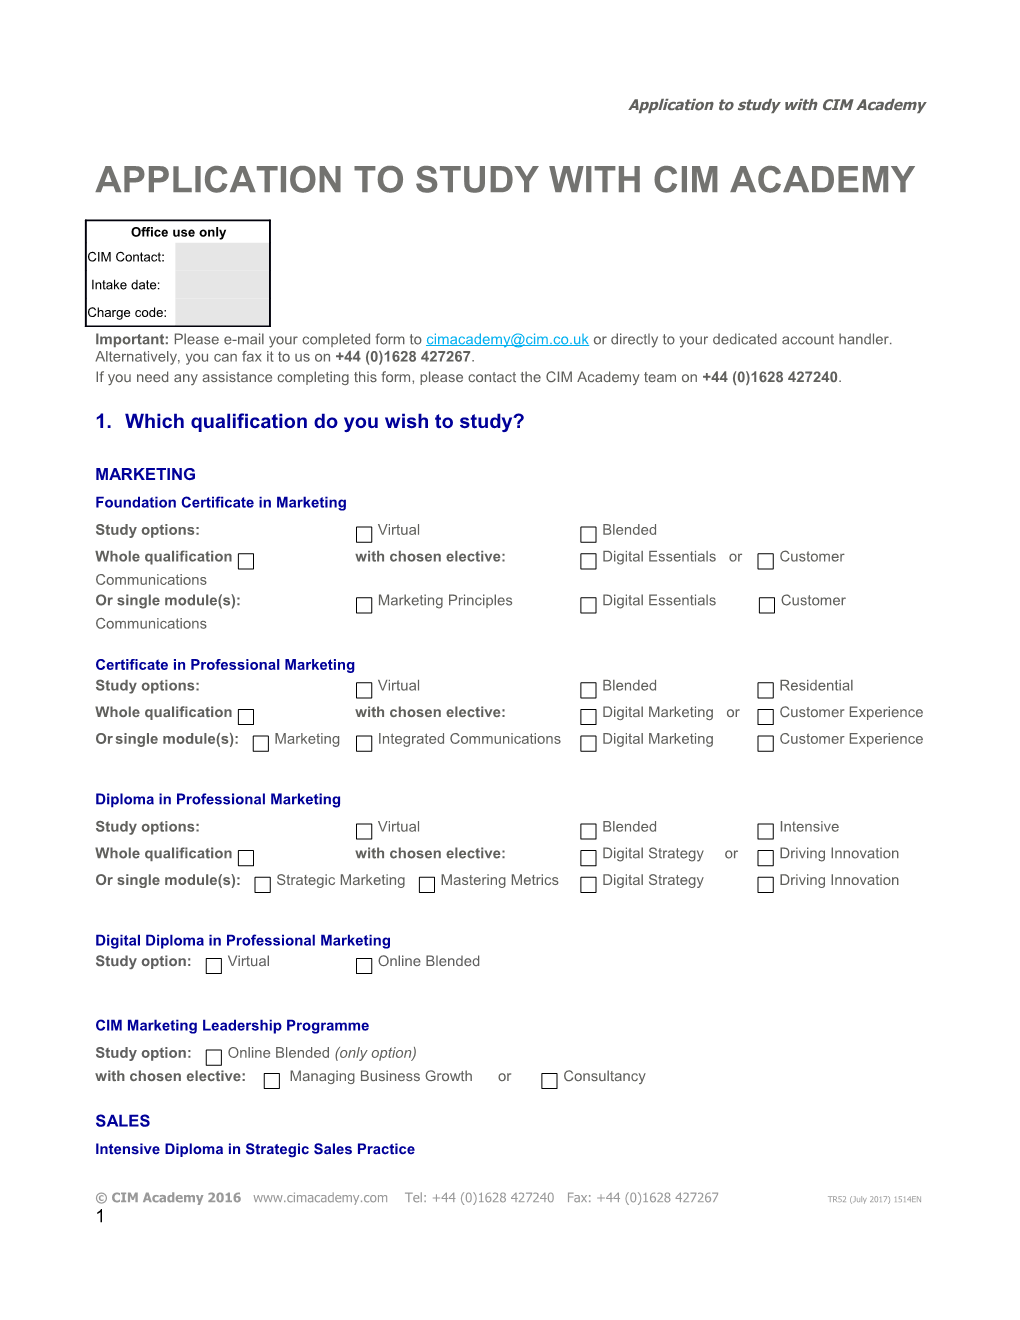 Application to Study with CIM Academy